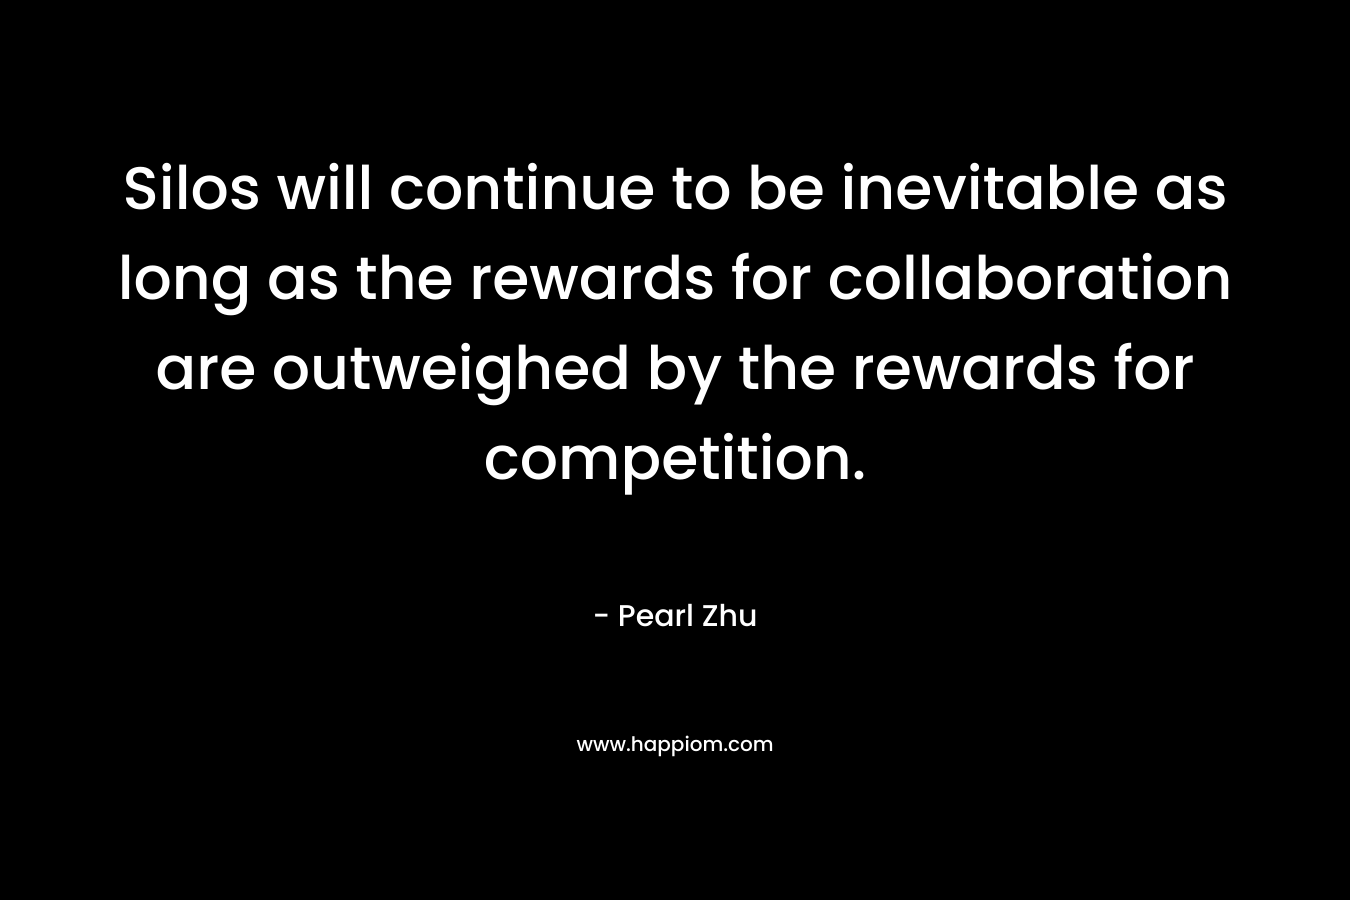 Silos will continue to be inevitable as long as the rewards for collaboration are outweighed by the rewards for competition.